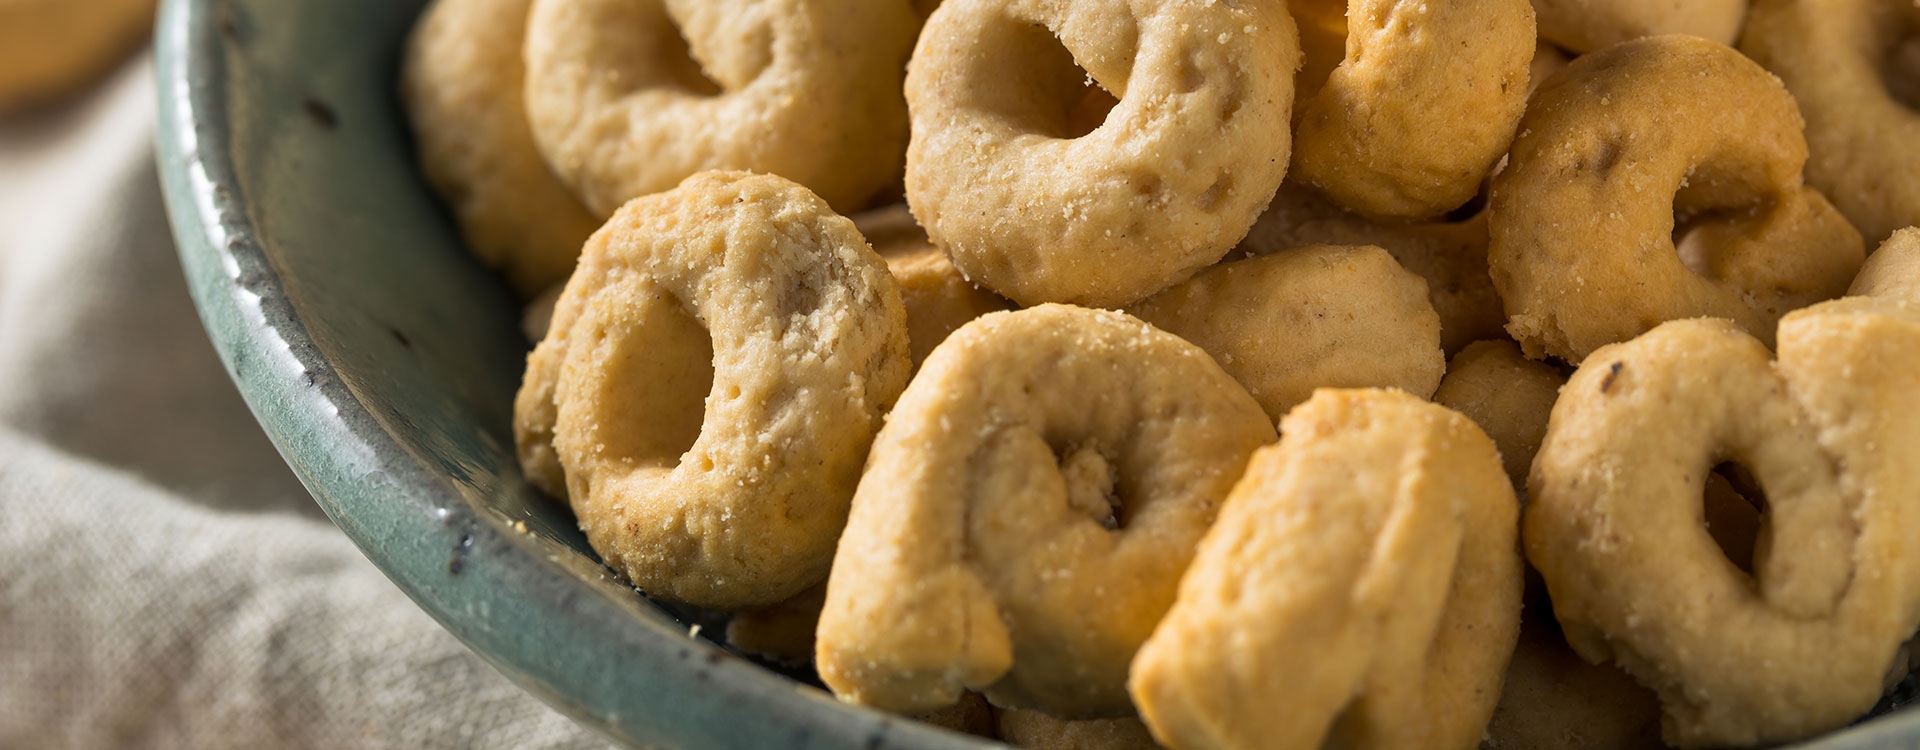 Taralli crackers from Bari, as tradition dictates